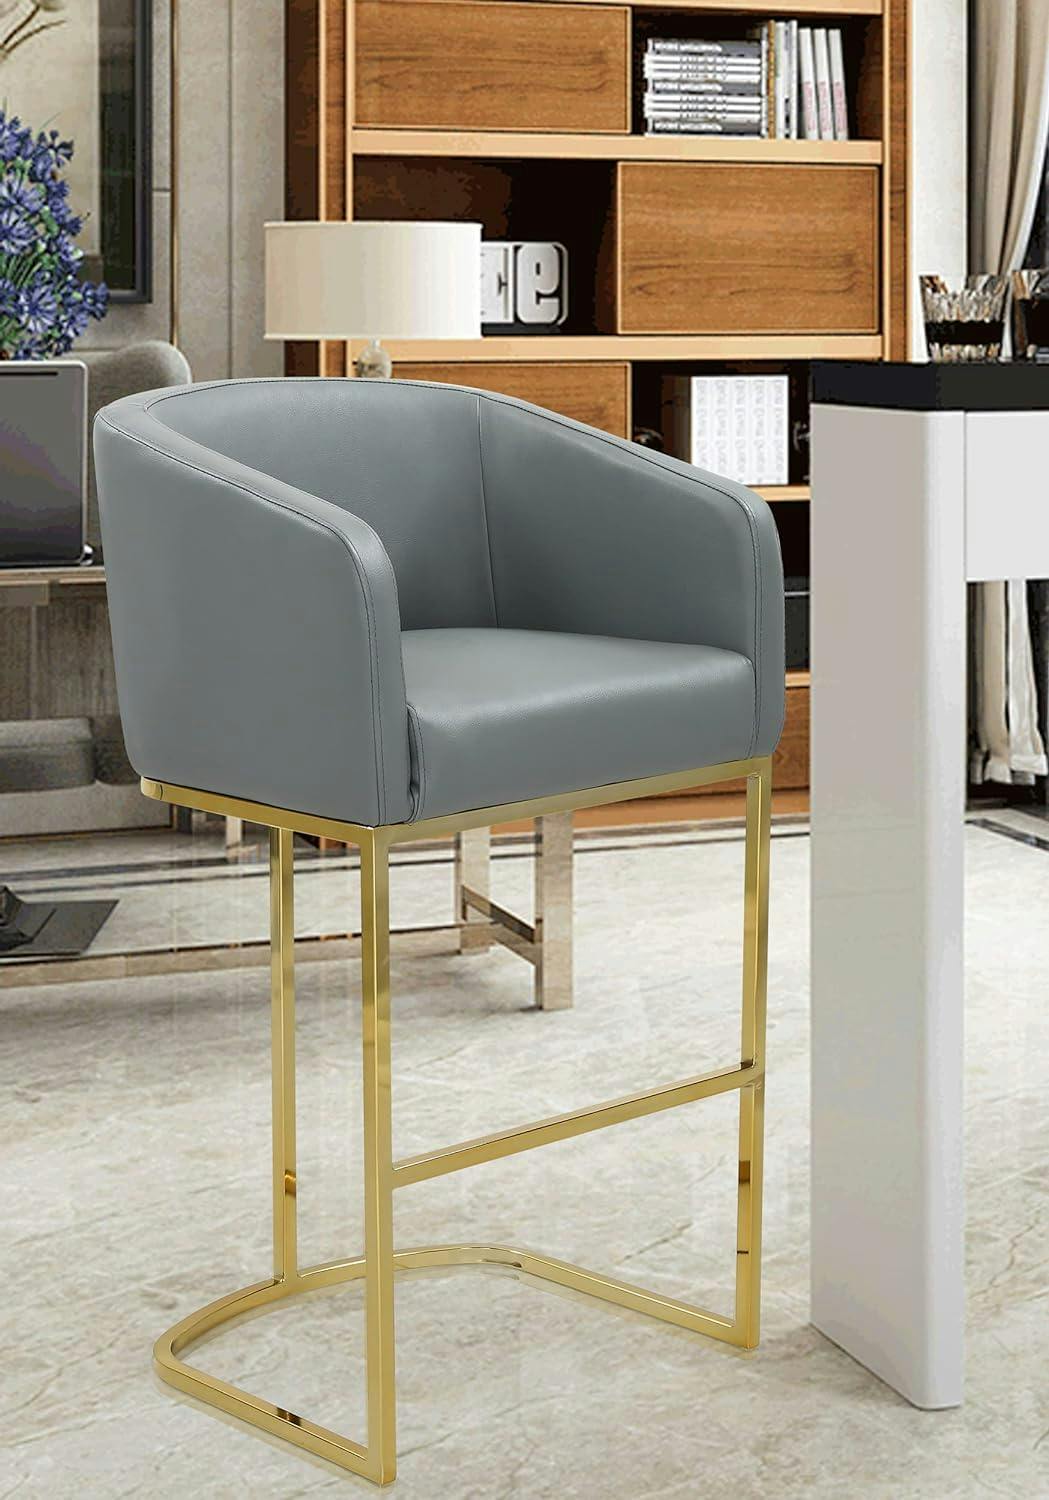 Tess Modern Gray Leather Bar Stool with Gold Metal Frame